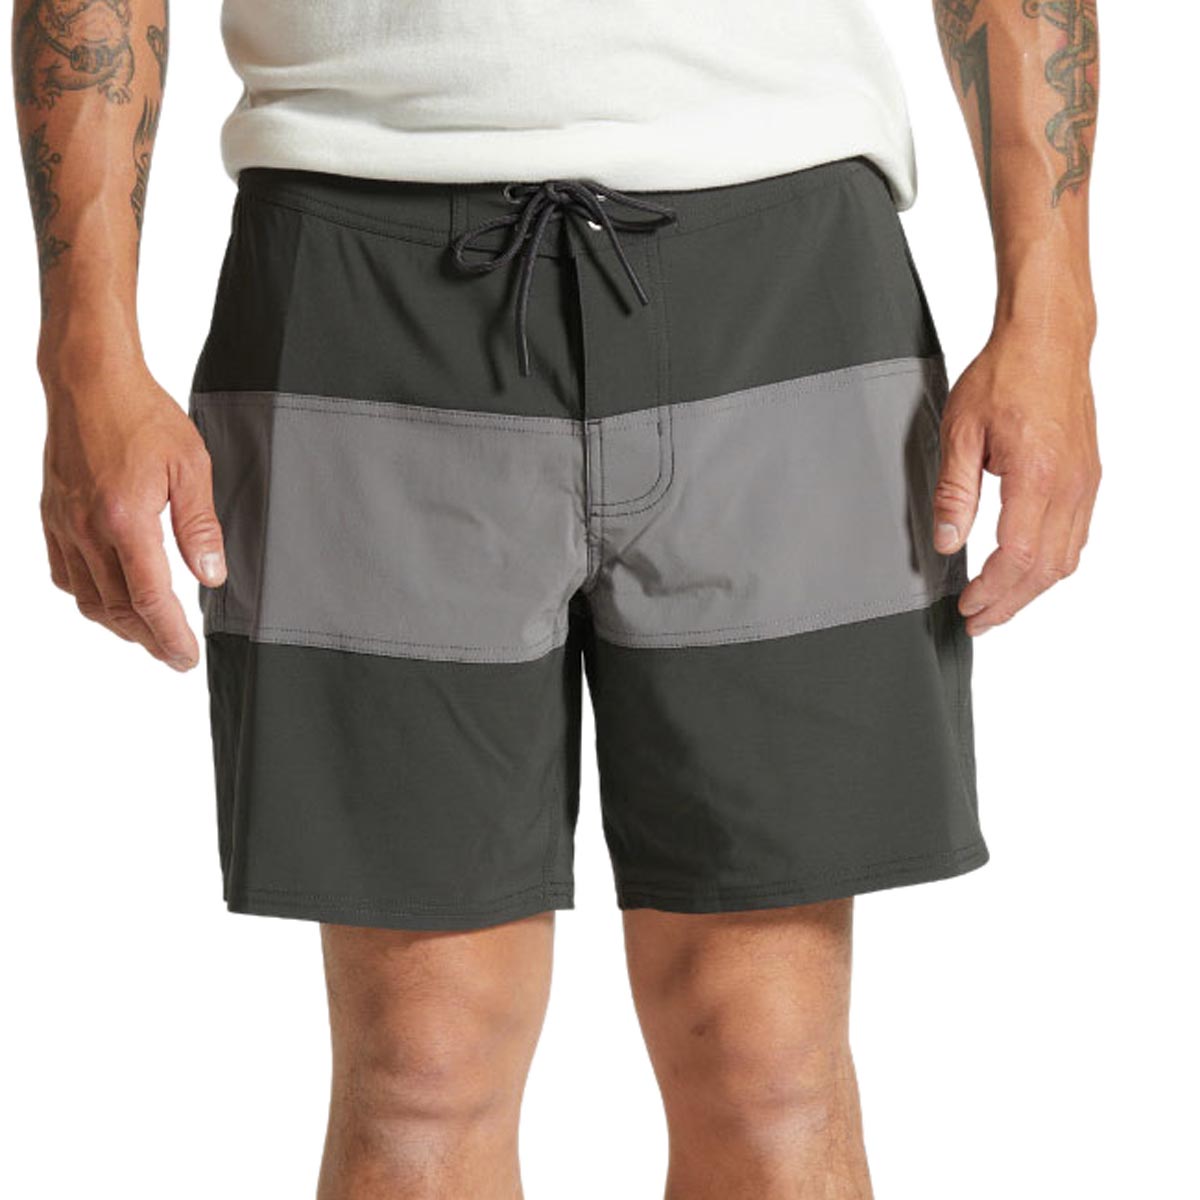 Brixton 60's Stretch Board Shorts - Washed Black/Charcoal image 2